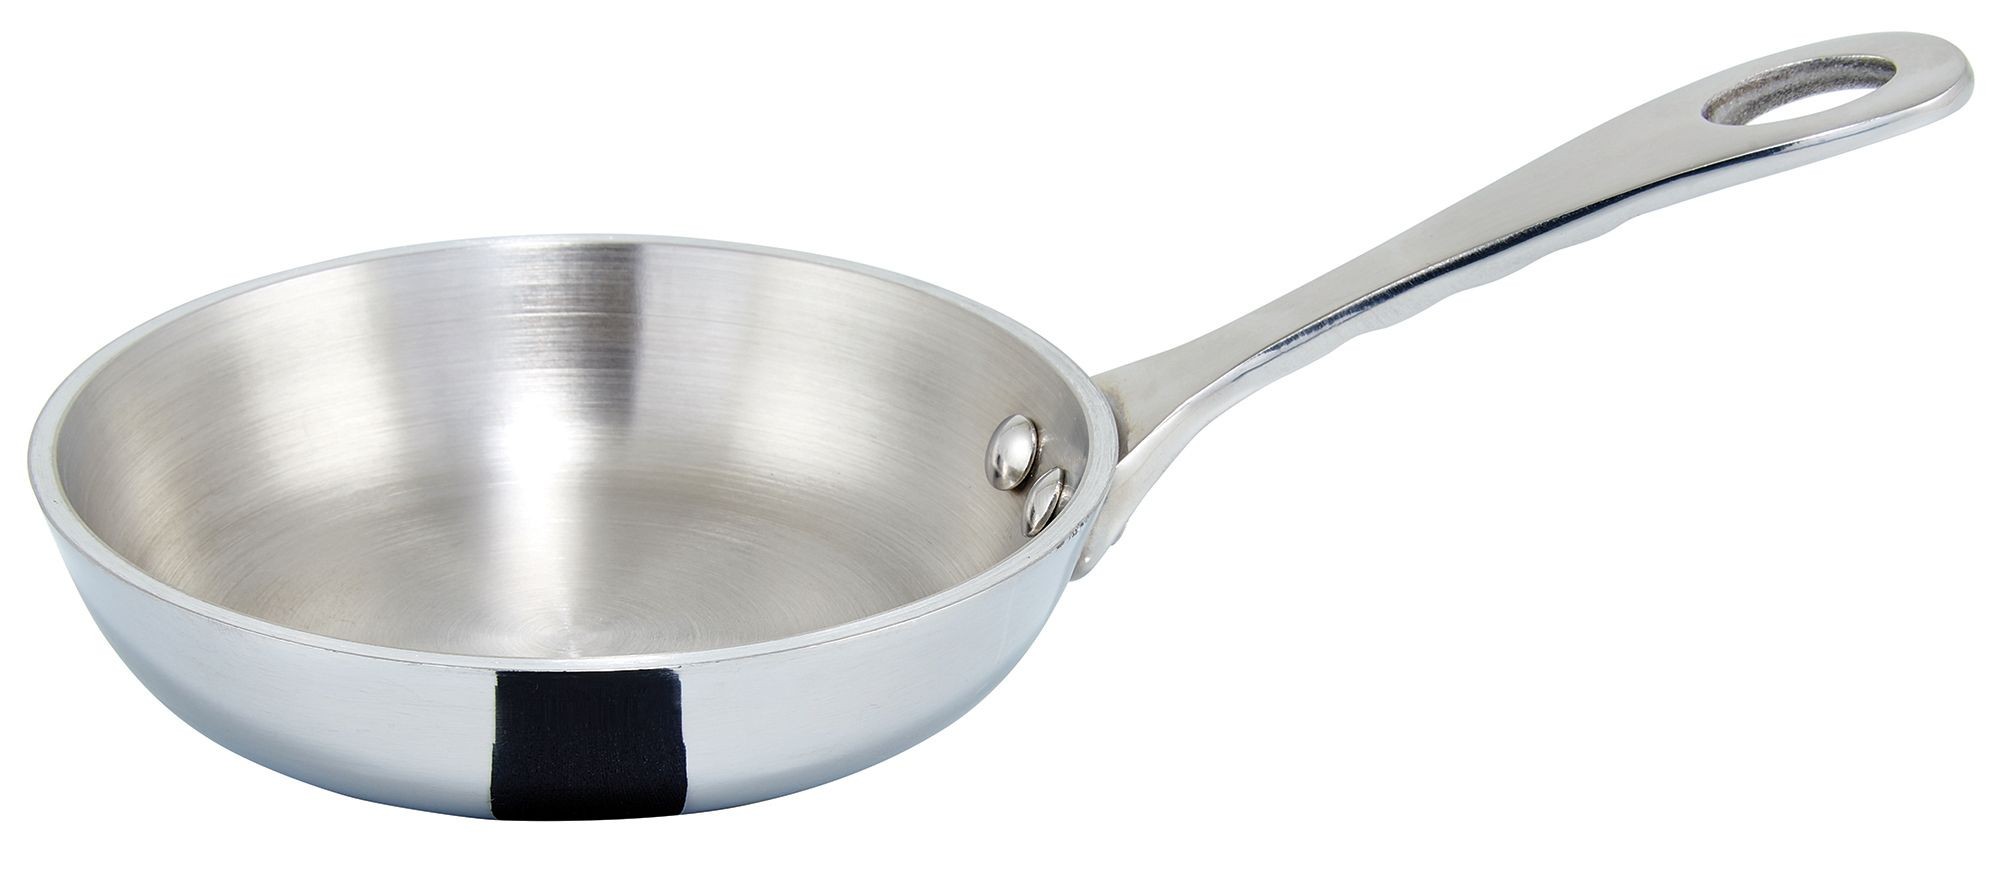 Winco DCFP-4S 4" Try-Ply Stainless Steel 5 oz. Mini Fry Pan